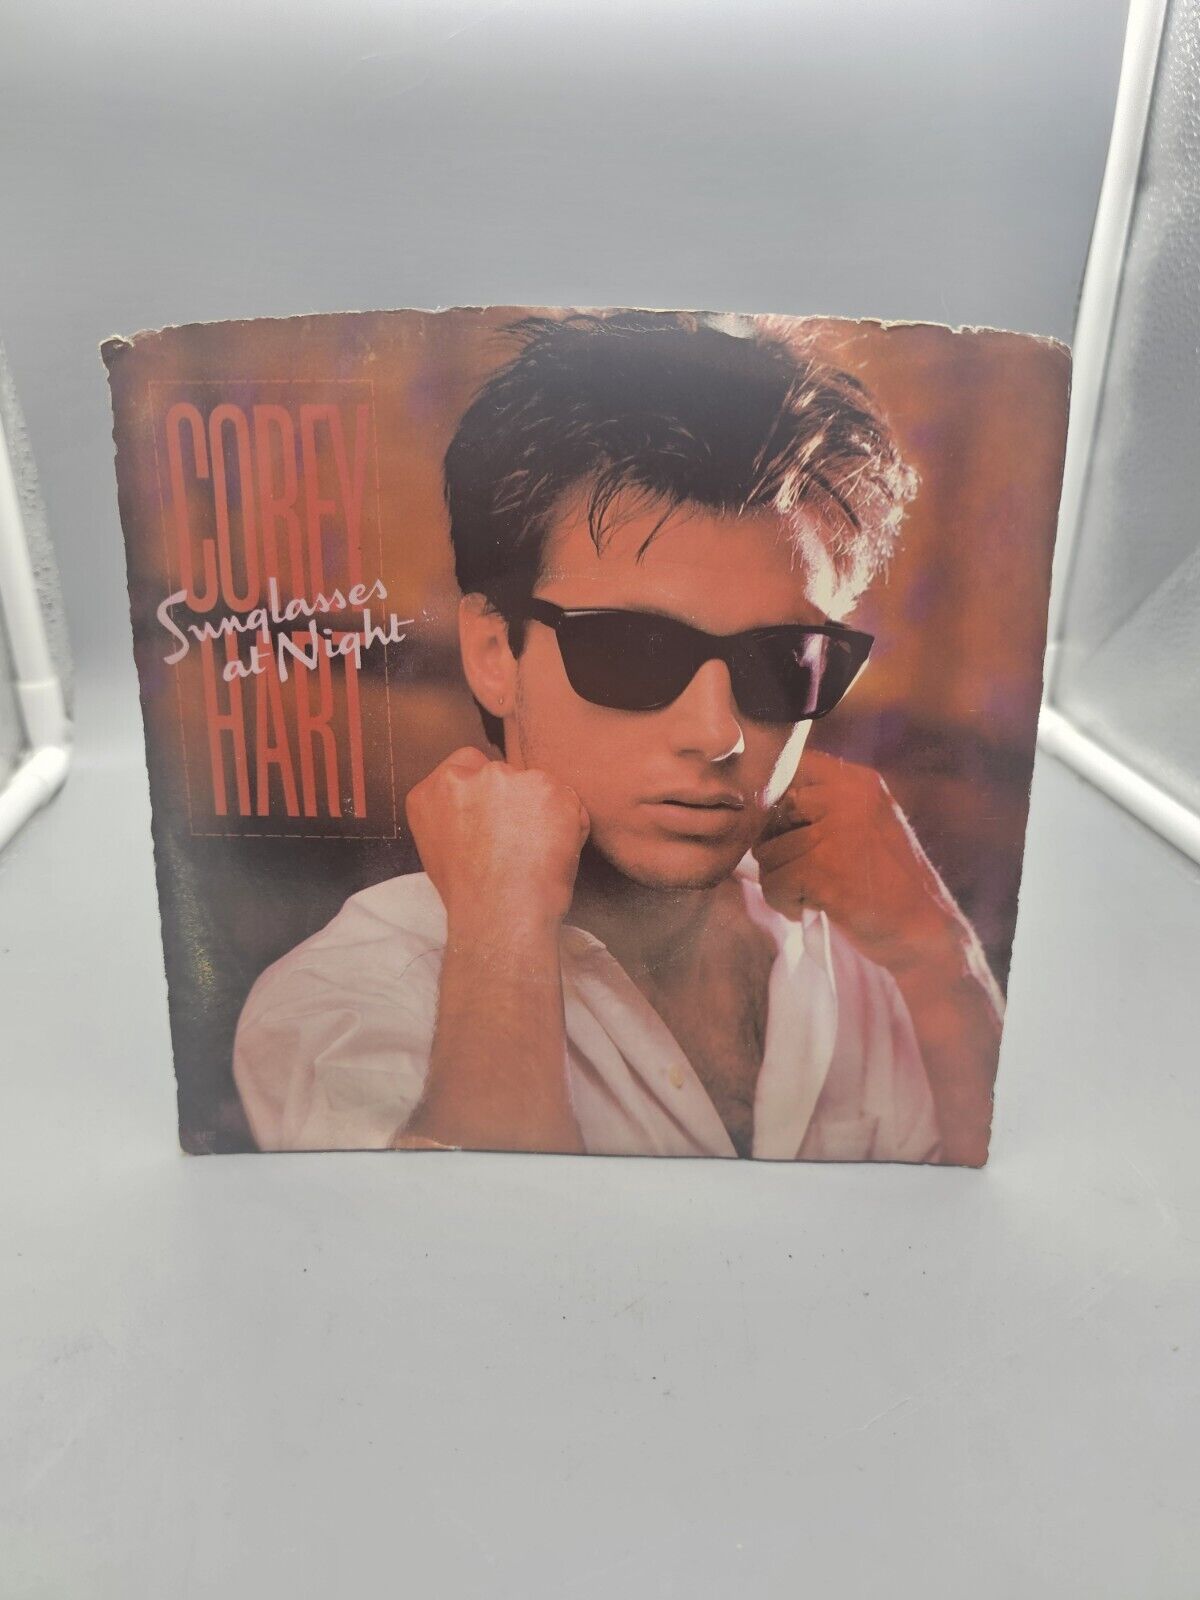 Corey Hart - Sunglasses at Night  (45 RPM) Picture Sleeve